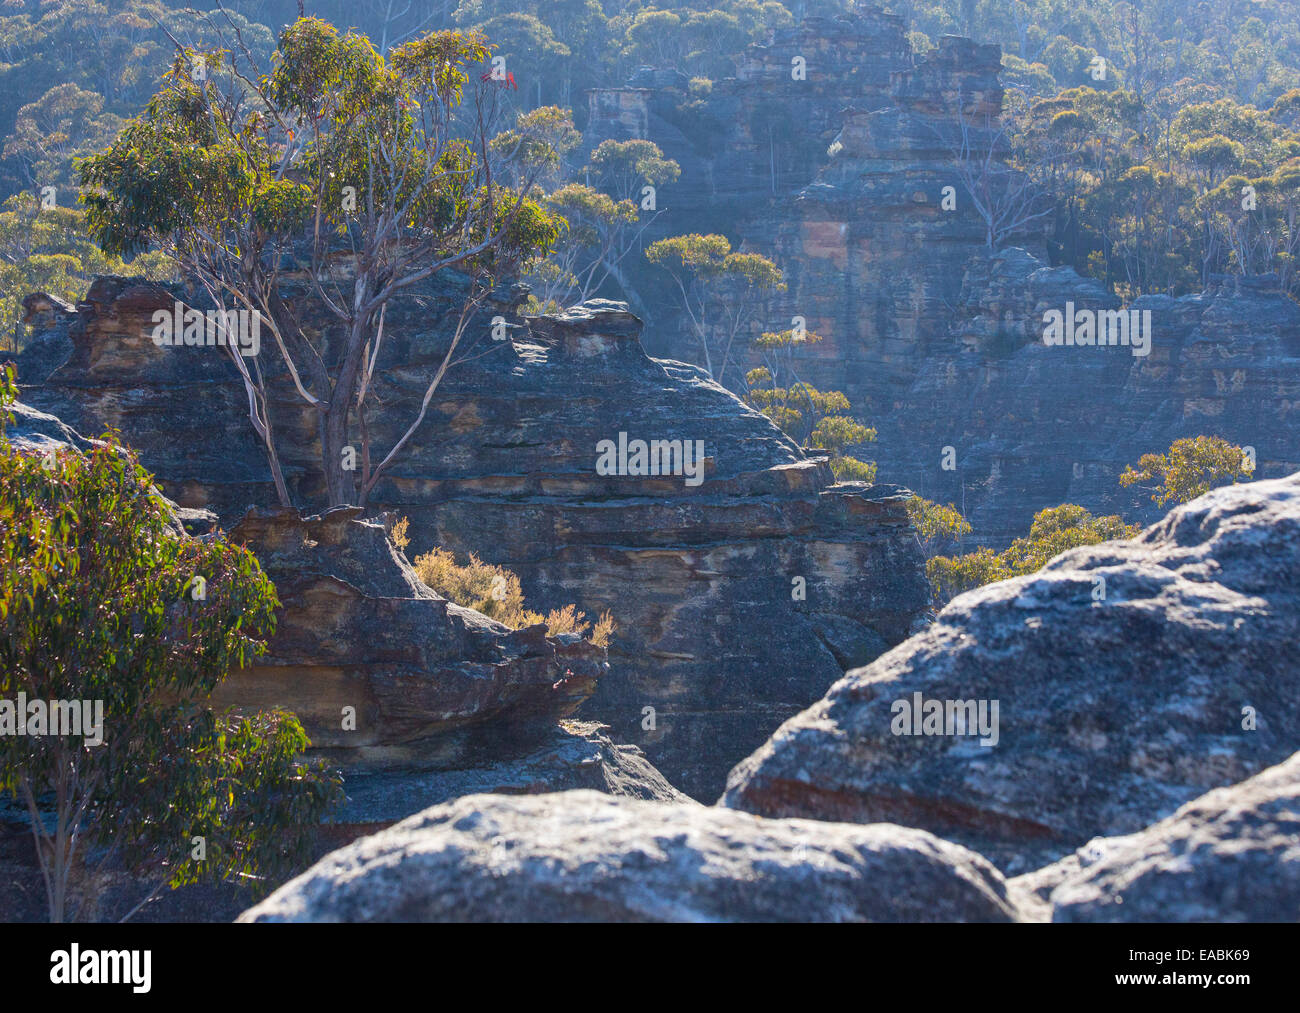 View of bushland and rugged sandstone gorges in Blue Mountains National Park, NSW, Australia Stock Photo